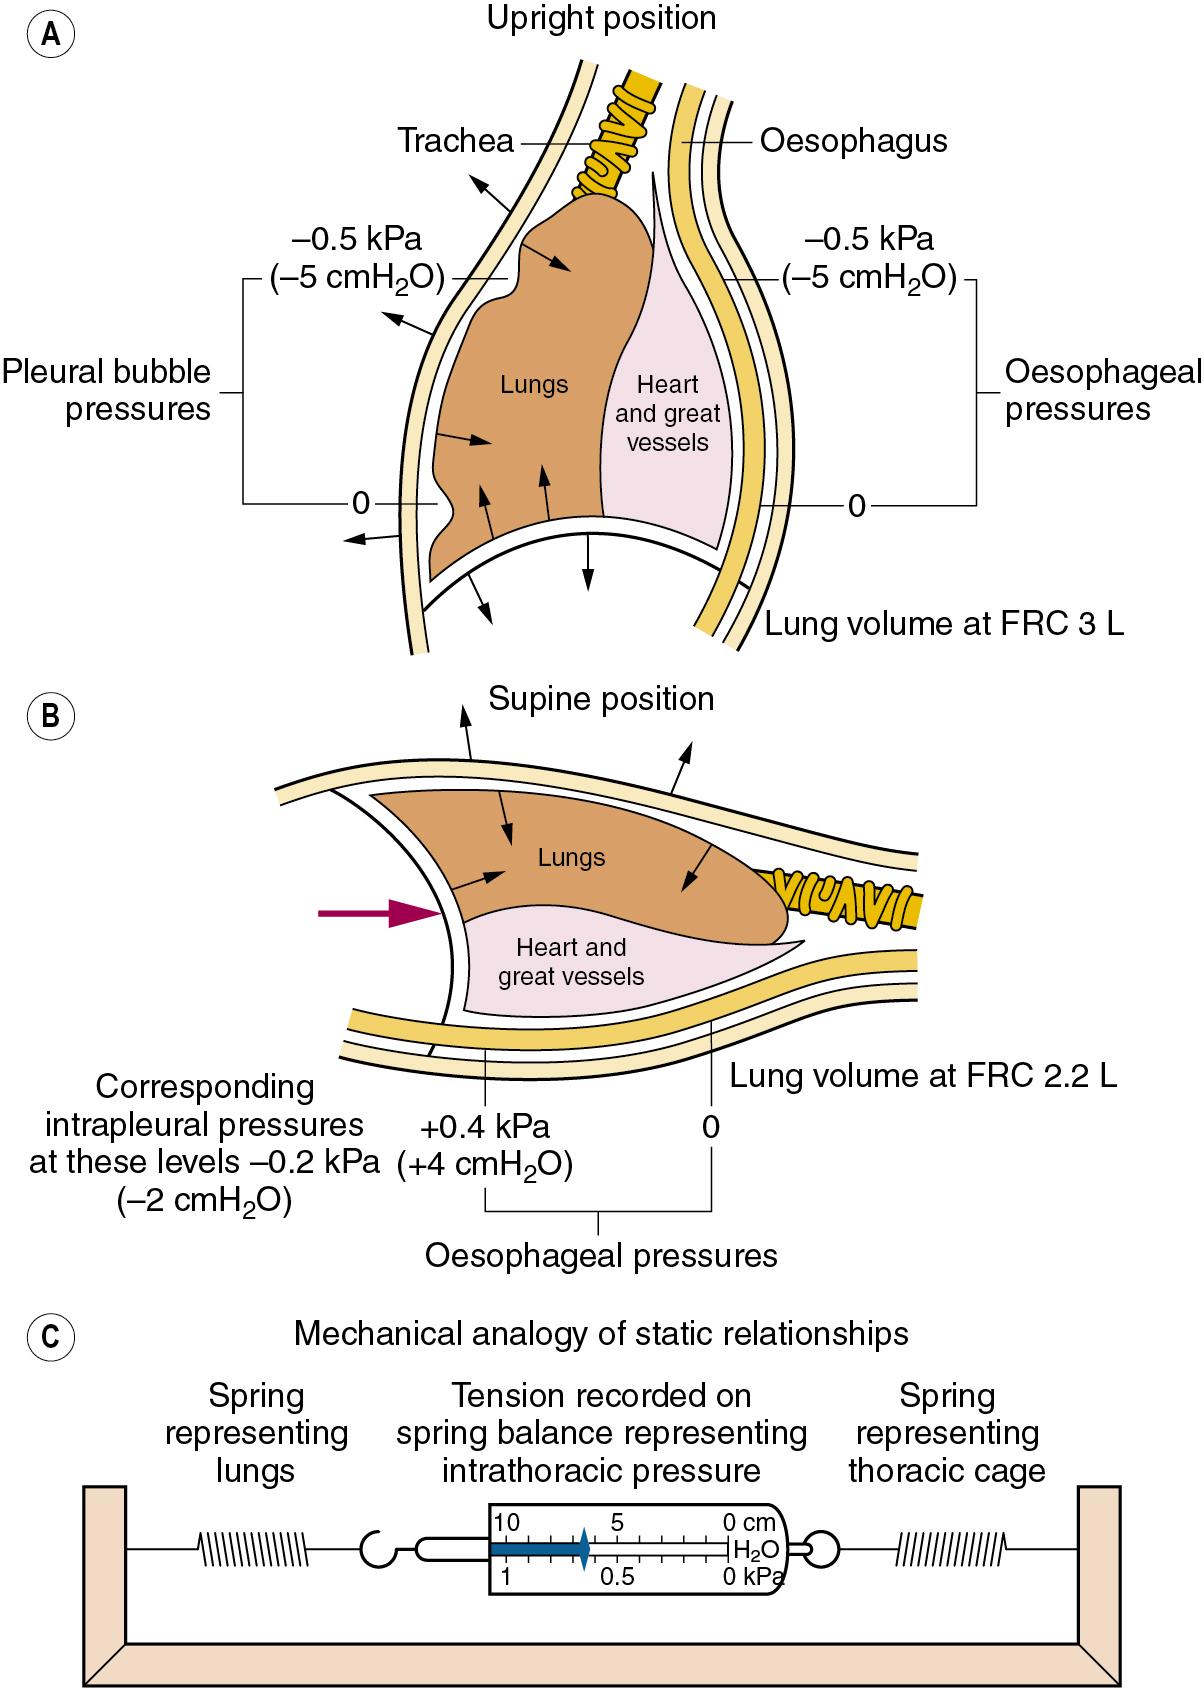 • Fig. 2.4, Intrathoracic pressures: static relationships in the resting end-expiratory position. The lung volume corresponds to the functional residual capacity (FRC) . (A) and (B) indicate the pressure relative to ambient (atmospheric). Arrows show the direction of elastic forces. The heavy arrow in (B) indicates displacement by the abdominal viscera. (C) The tension in the two springs is the same and will be indicated on the spring balance. In the supine position: 1, the FRC is reduced; 2, the intrathoracic pressure is raised; 3, the weight of the heart raises the oesophageal pressure above the intrapleural pressure.